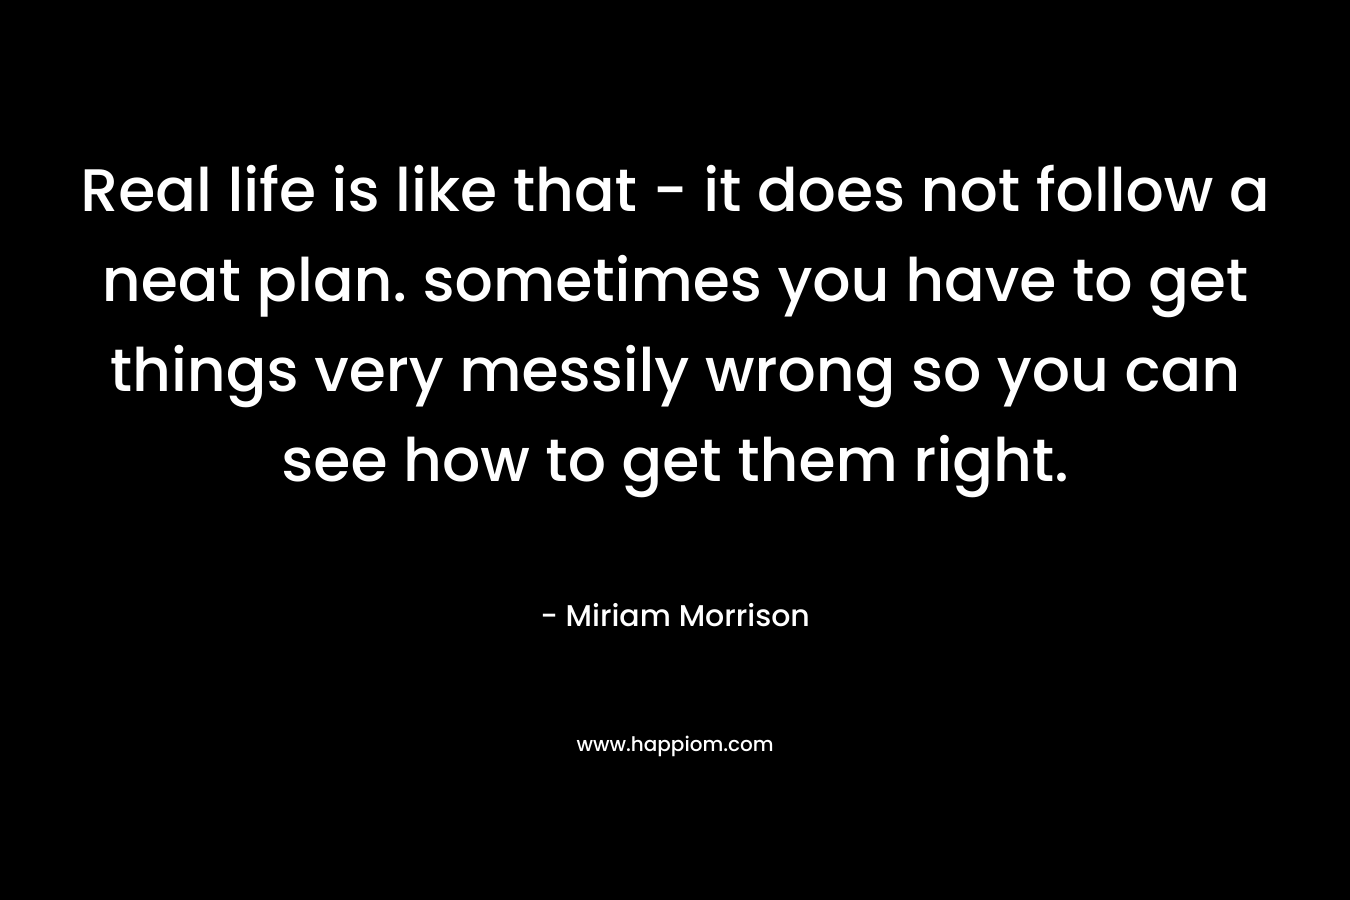 Real life is like that - it does not follow a neat plan. sometimes you have to get things very messily wrong so you can see how to get them right.